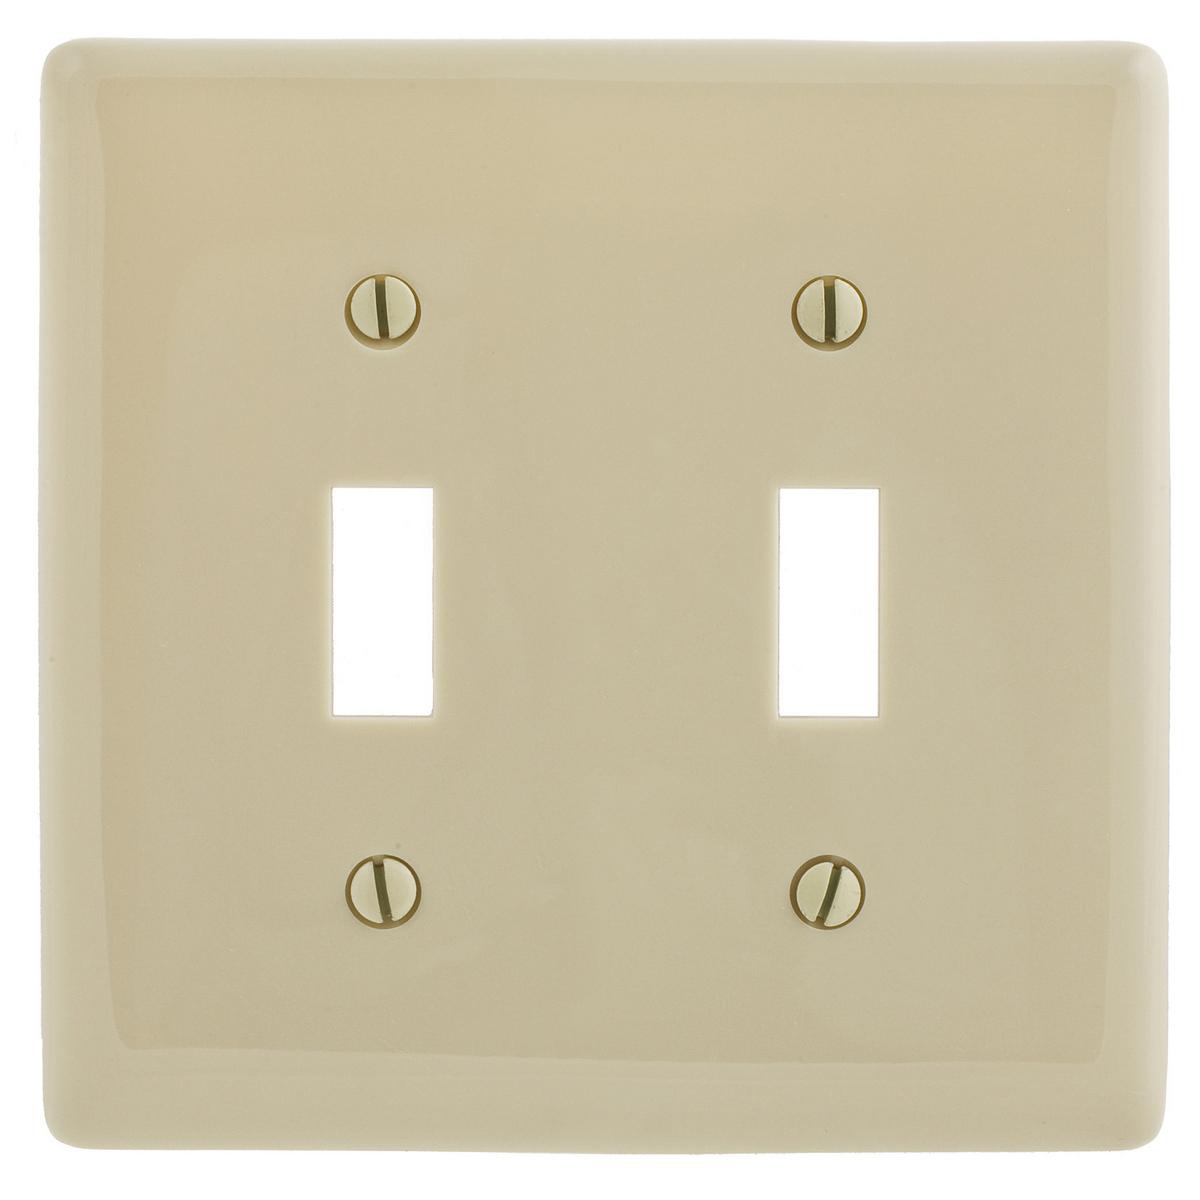 Hubbell NPJ2I Wallplates and Box Covers, Wallplate, Nylon, Mid-Sized, 2-Gang, 2) Toggle, Ivory  ; Reinforcement ribs for extra strength ; Captive screw feature holds mounting screw in place ; High-impact, self-extinguishing nylon material ; Smooth, easy to clean finish